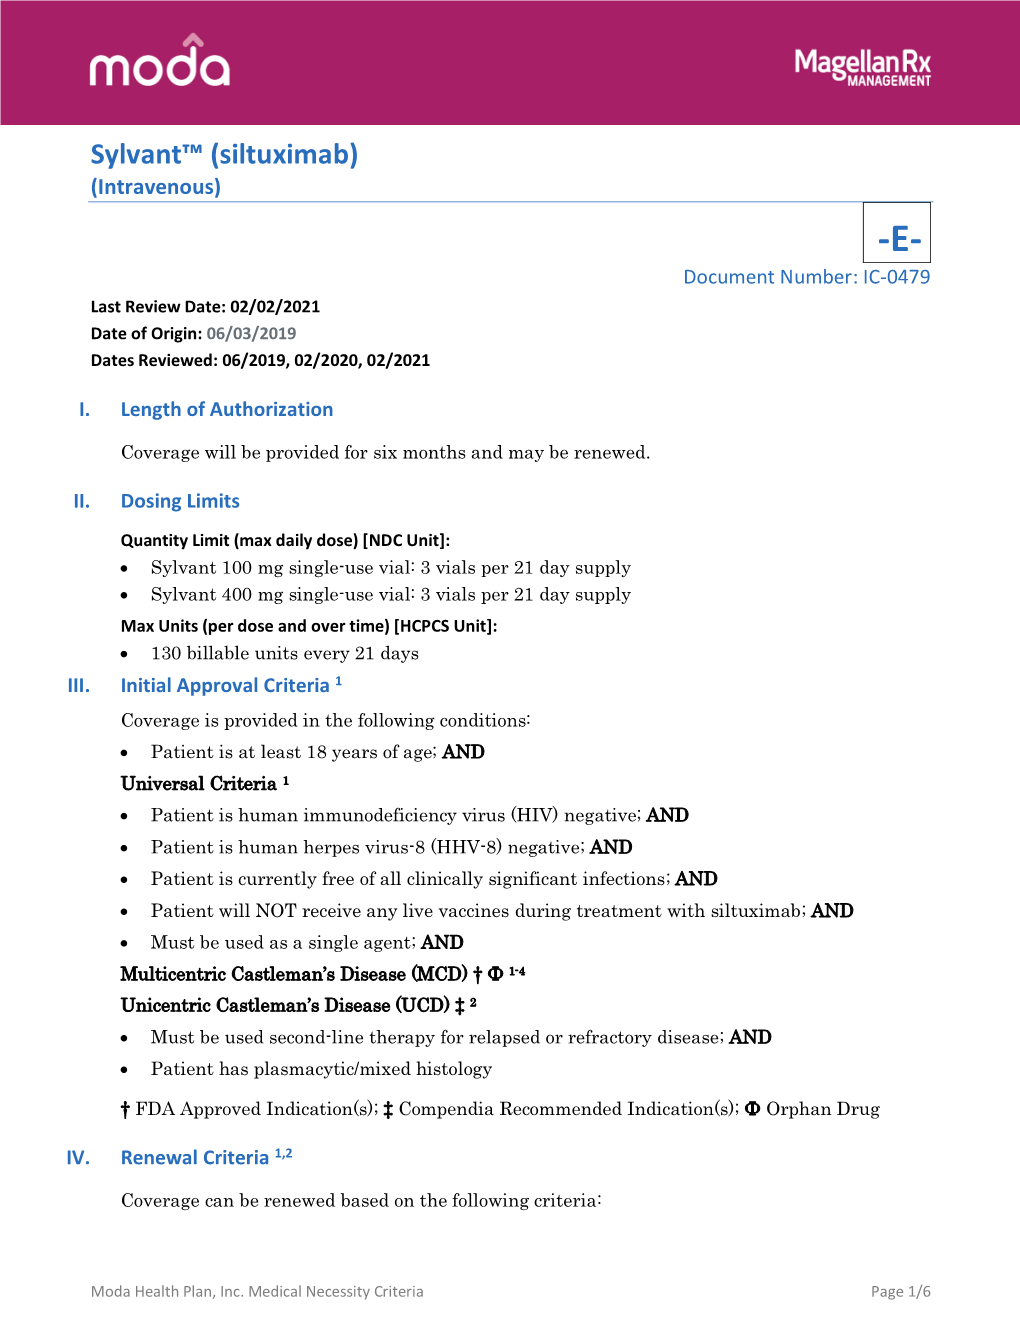 Sylvant™ (Siltuximab) (Intravenous) -E- Document Number: IC-0479 Last Review Date: 02/02/2021 Date of Origin: 06/03/2019 Dates Reviewed: 06/2019, 02/2020, 02/2021